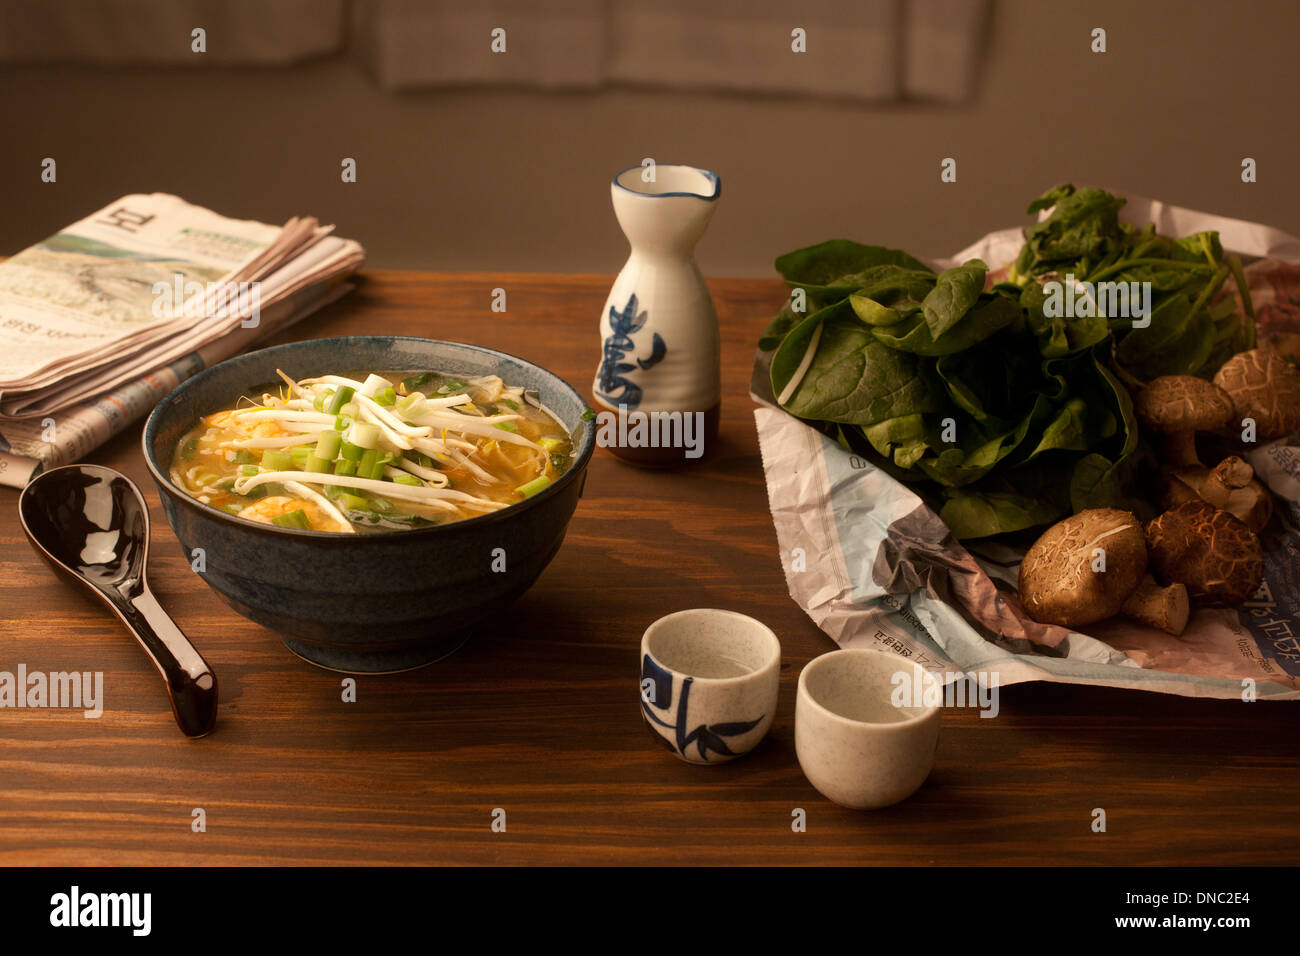 Ramen soup still life with sake and vegetables Stock Photo